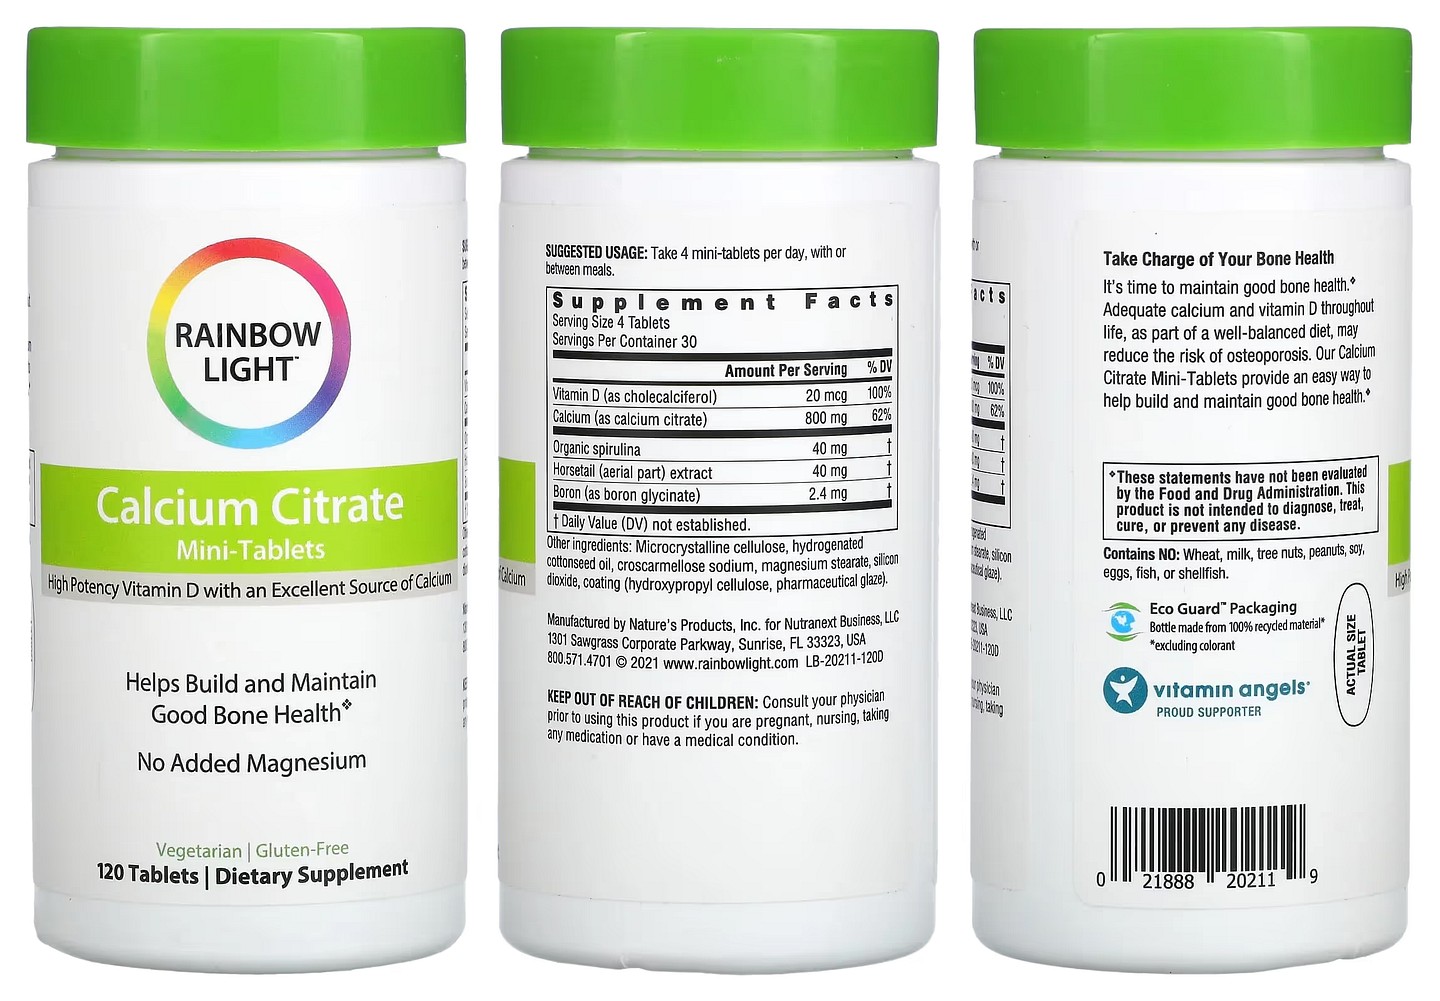 Rainbow Light, Calcium Citrate Mini-Tablets packaging